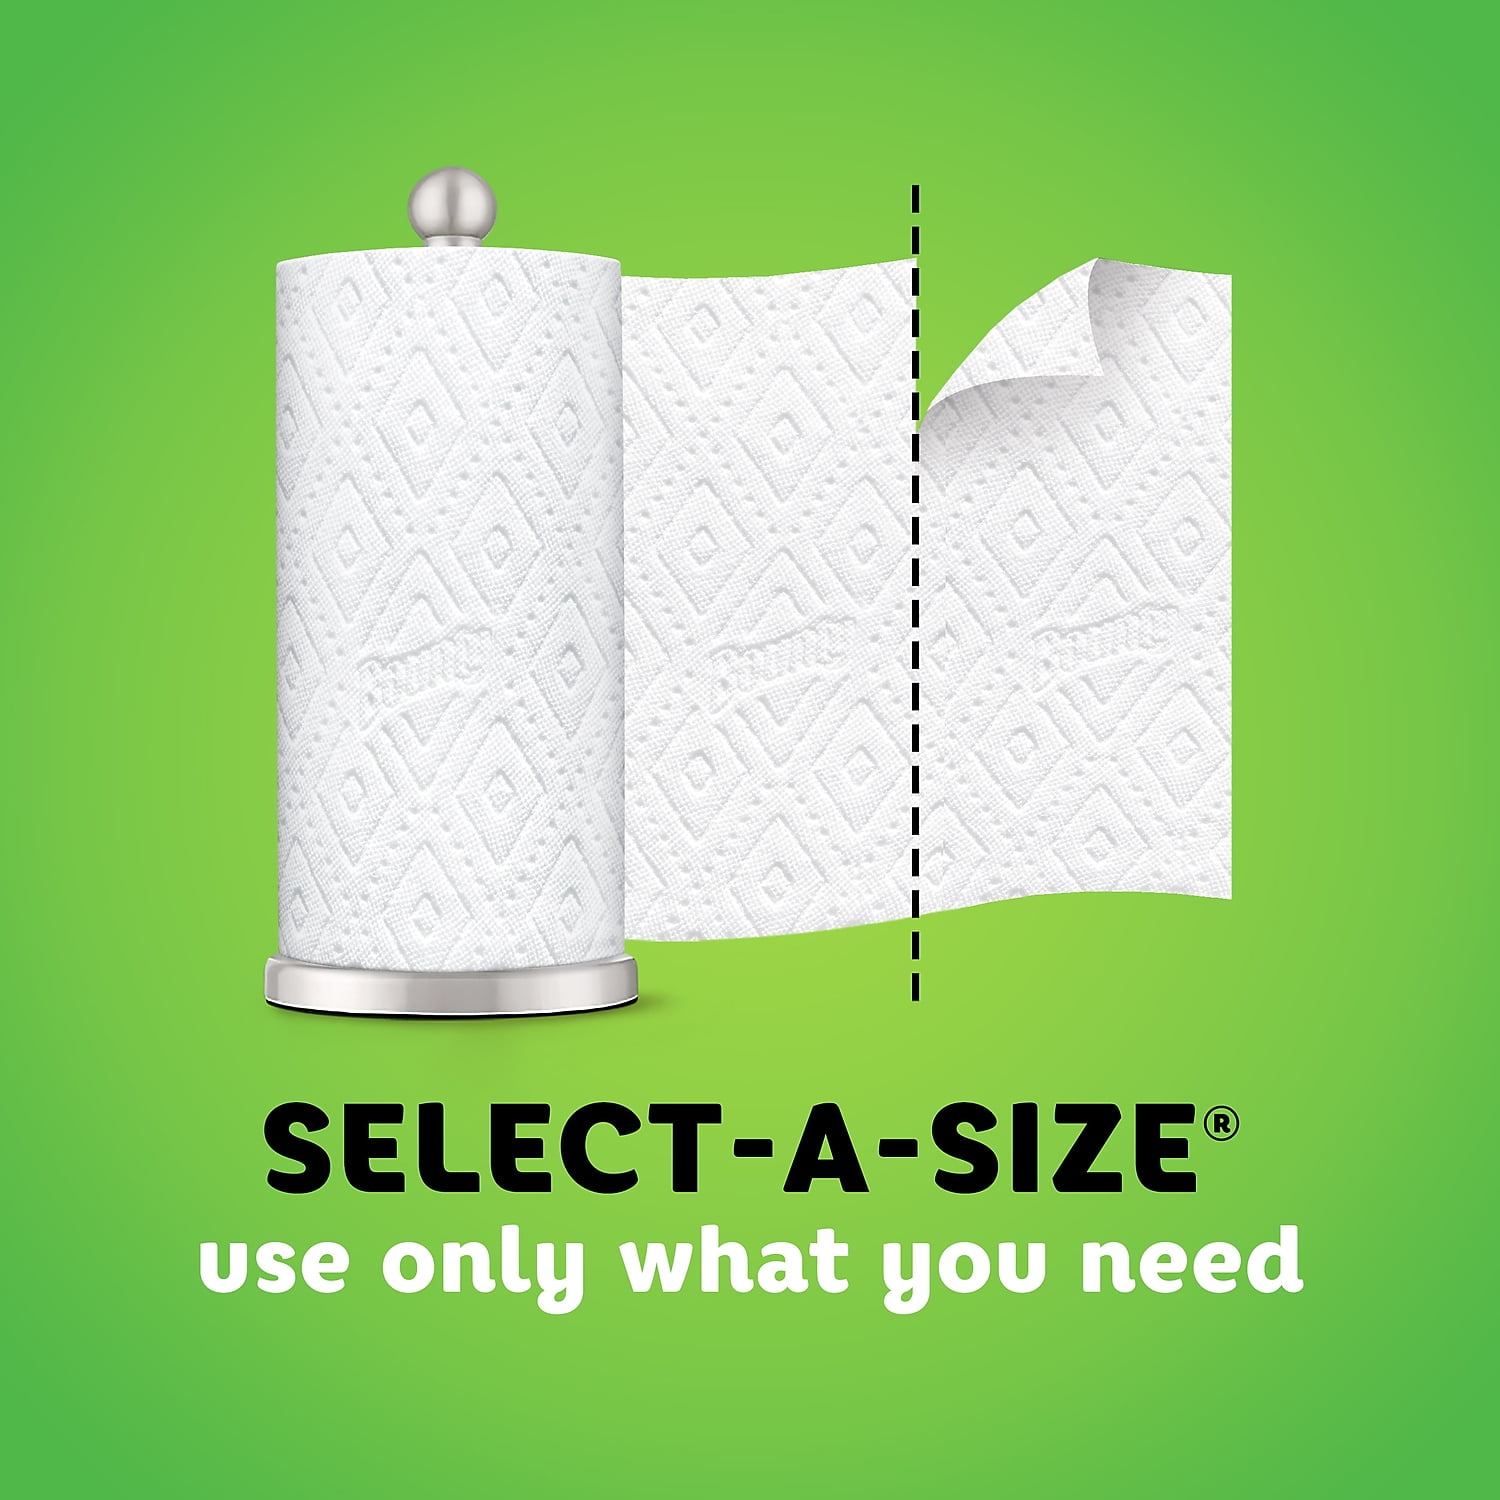 Bounty Select-A-Size Kitchen Rolls Paper Towel 2-Ply White 98 Sheets/Roll 24 Double Rolls/Carton - 3